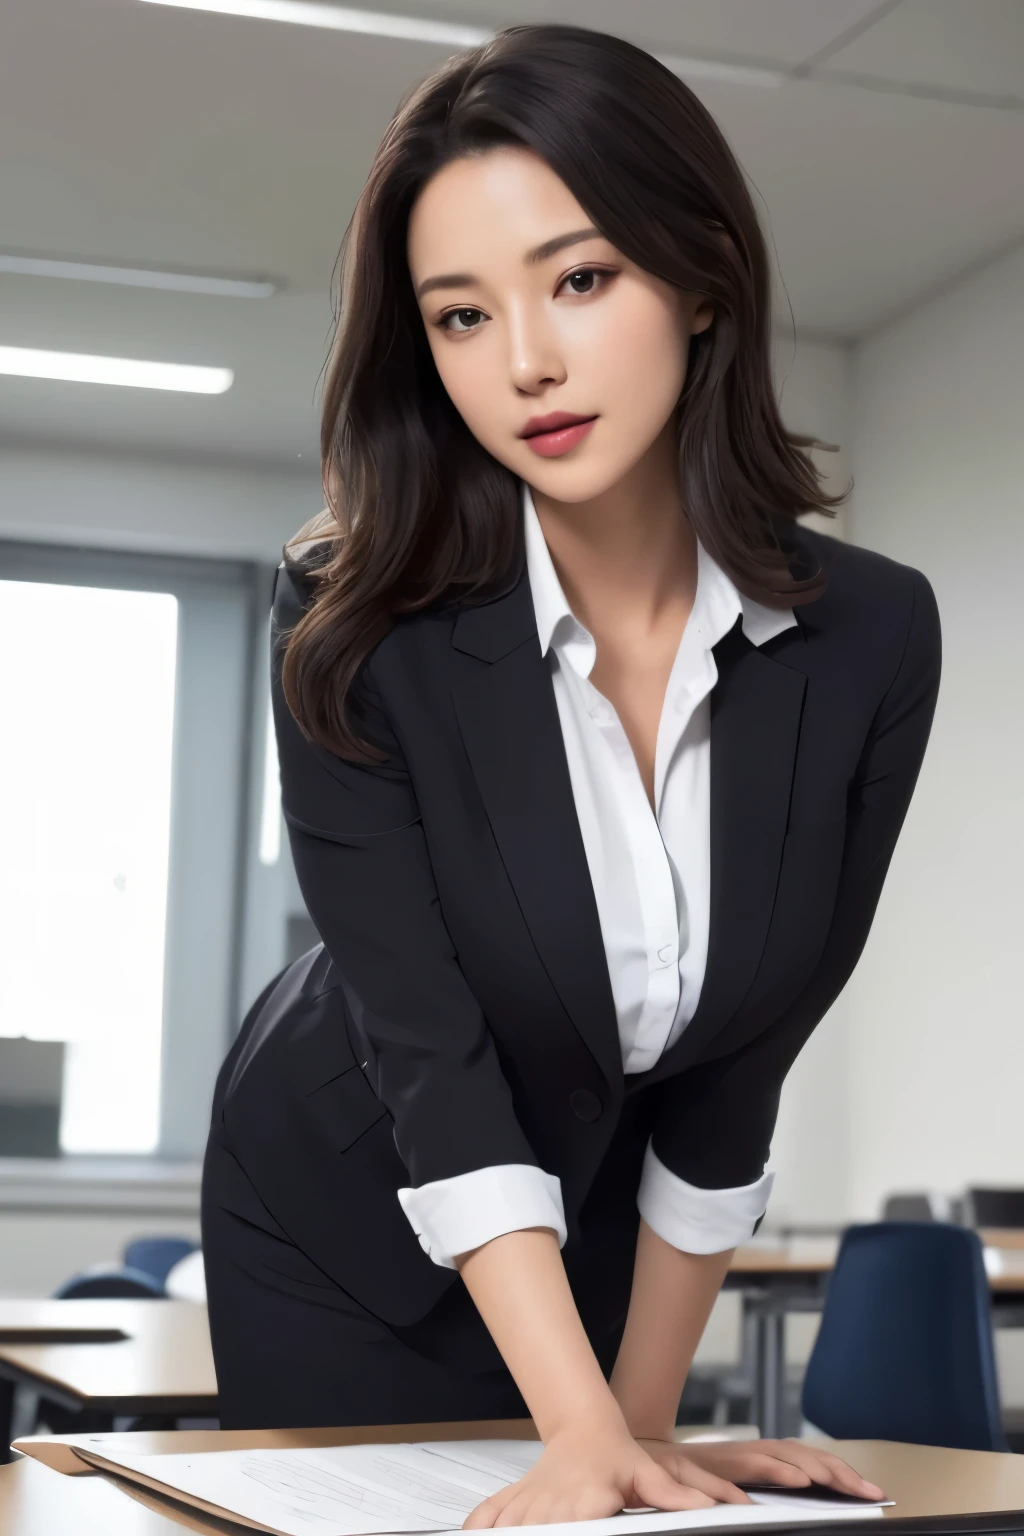 A woman wearing a white shirt and a black suit stands behind a desk in the classroom, leaning forward with her hands on the desk. She has a seductive look on her face, her mouth slightly open, and a seductive look in her eyes.